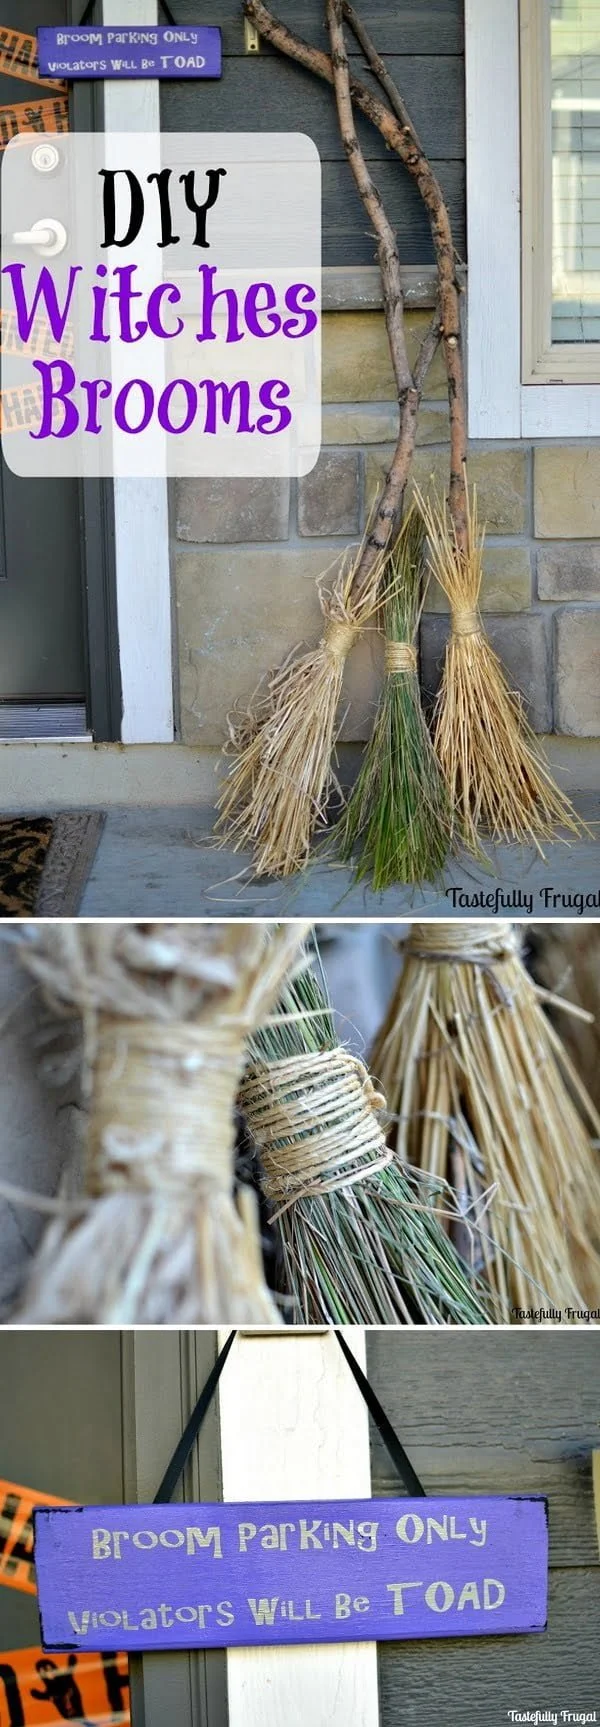 Check out the tutorial on how to make DIY witches brooms for Halloween home decoration